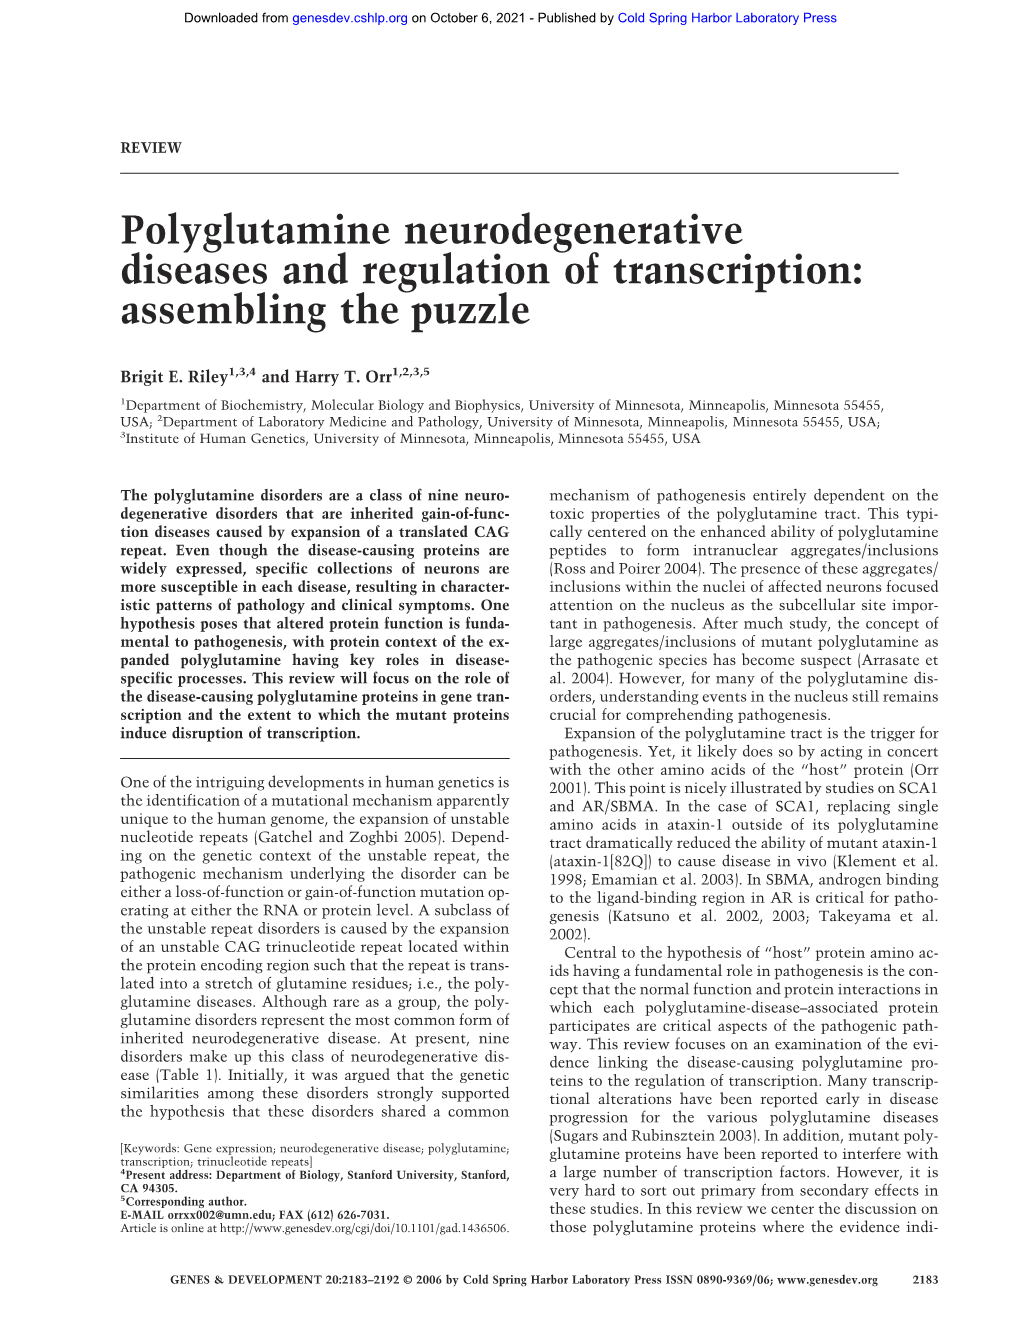 Polyglutamine Neurodegenerative Diseases and Regulation of Transcription: Assembling the Puzzle